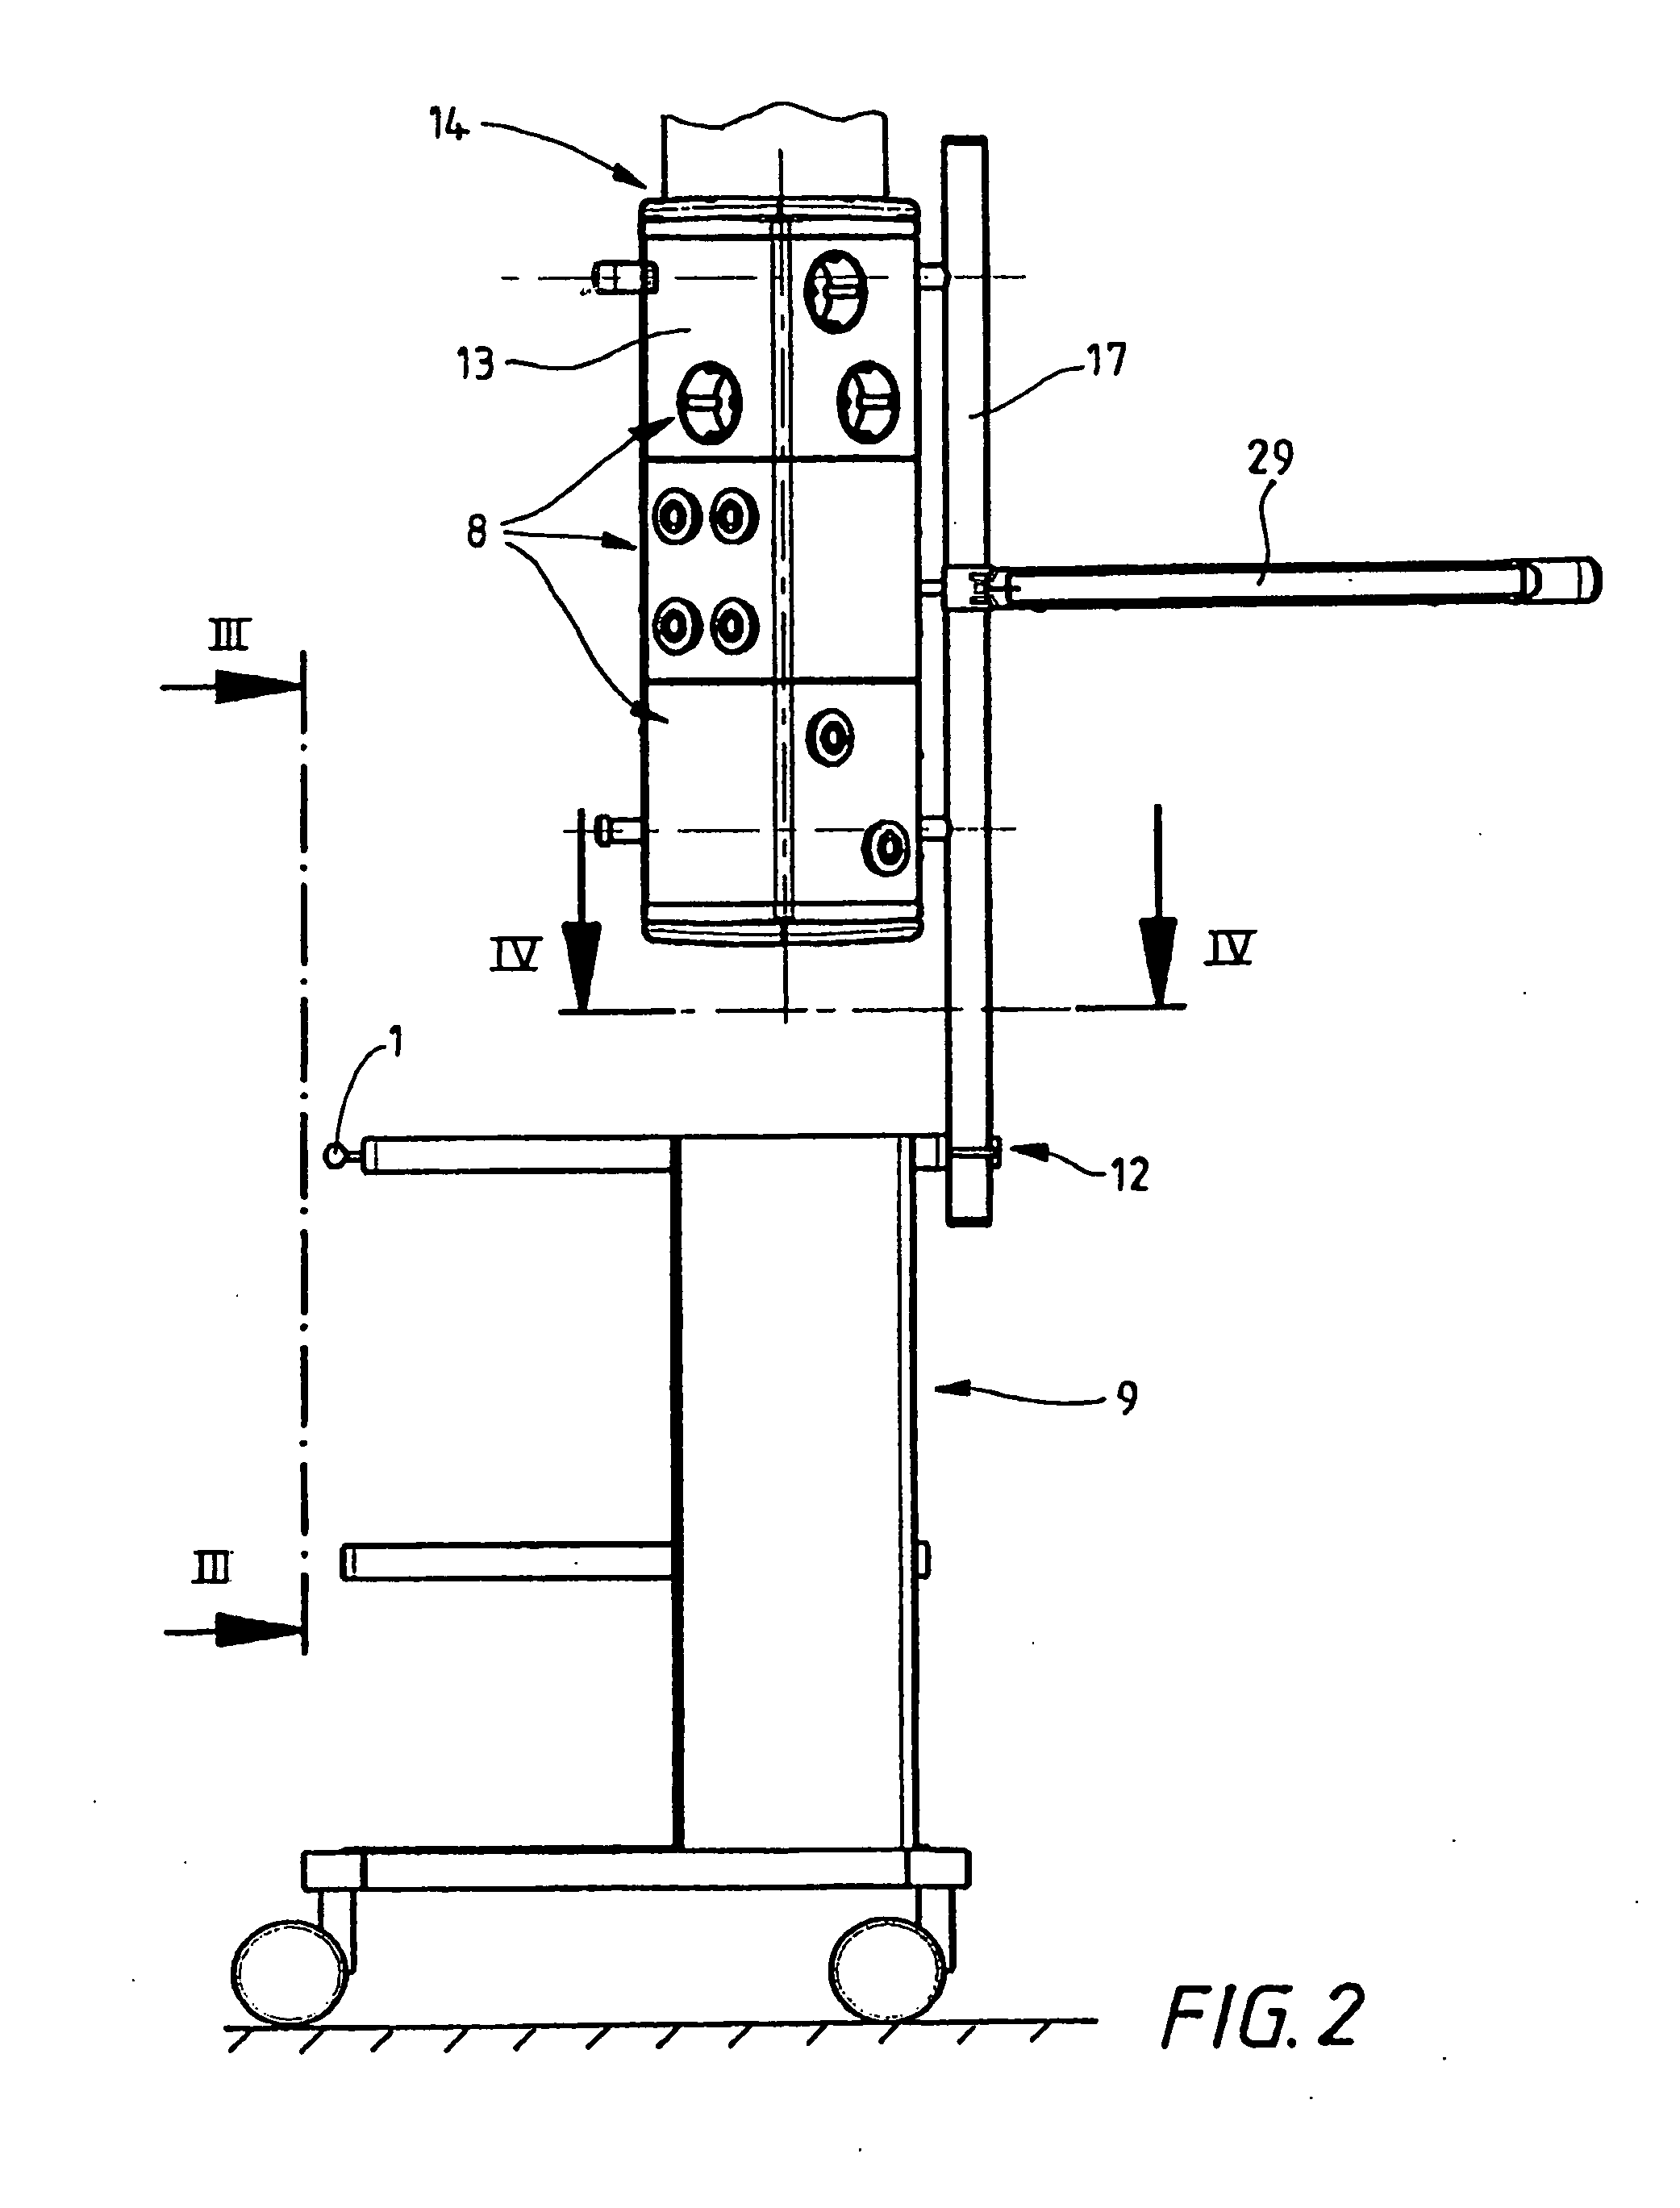 Coupling device of a transport cart with a structure of a supply panel for medical applications